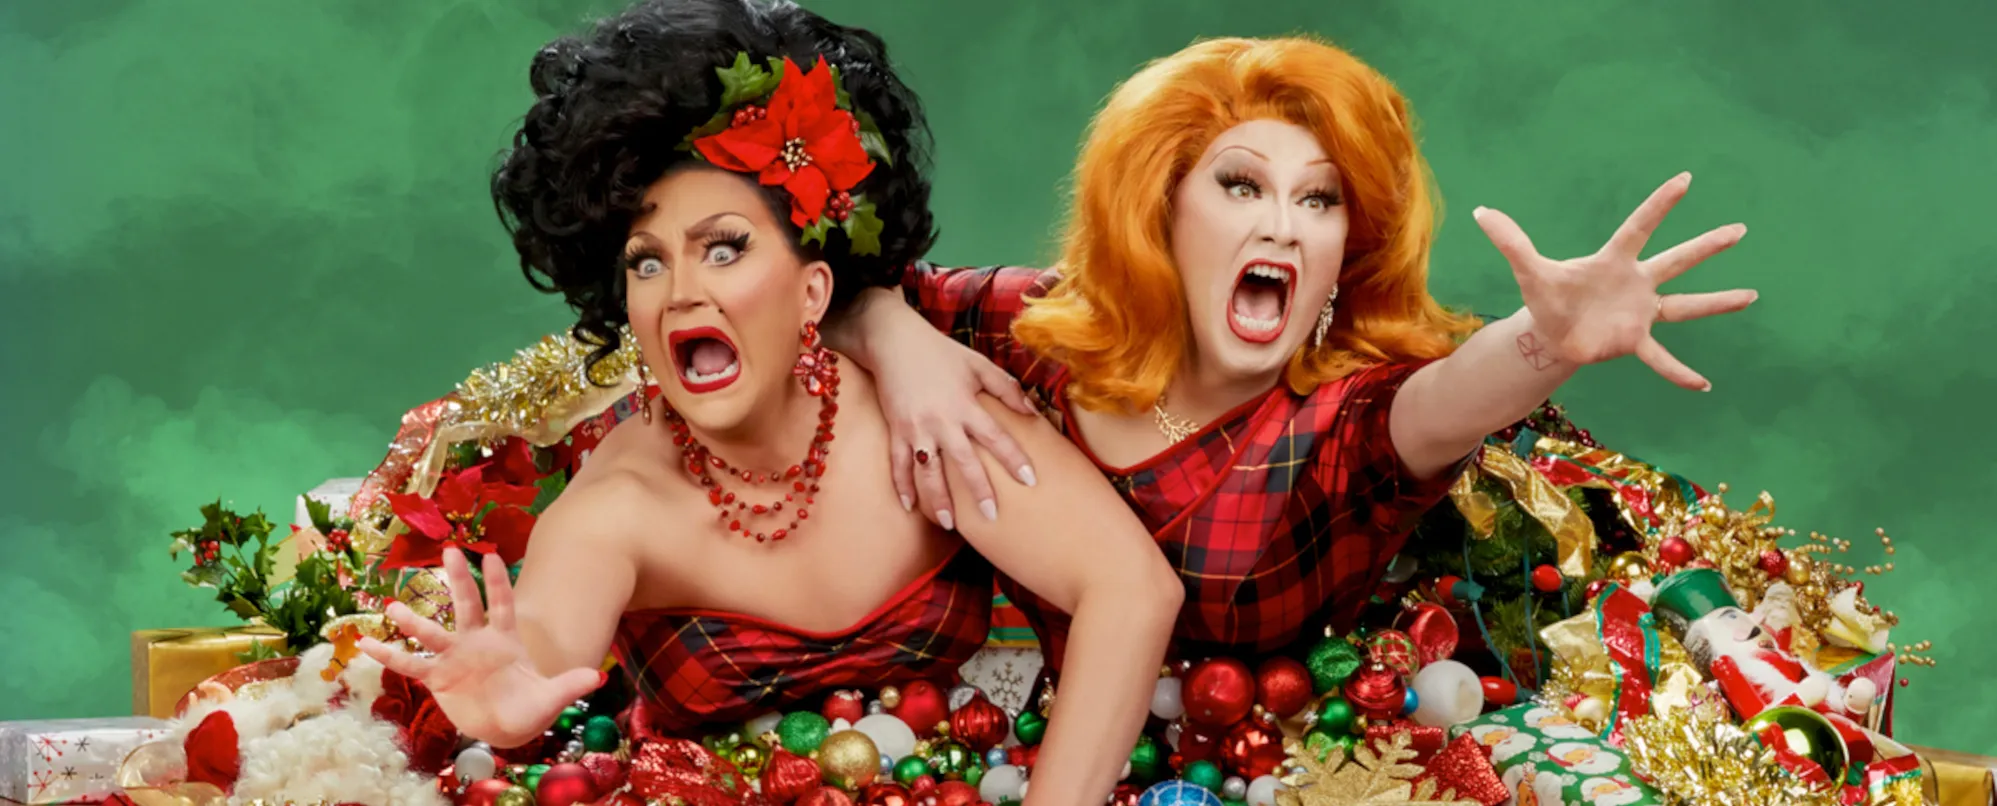 Drag Star BenDeLaCreme Talks New Holiday Musical, Collaborating with Jinkx Monsoon